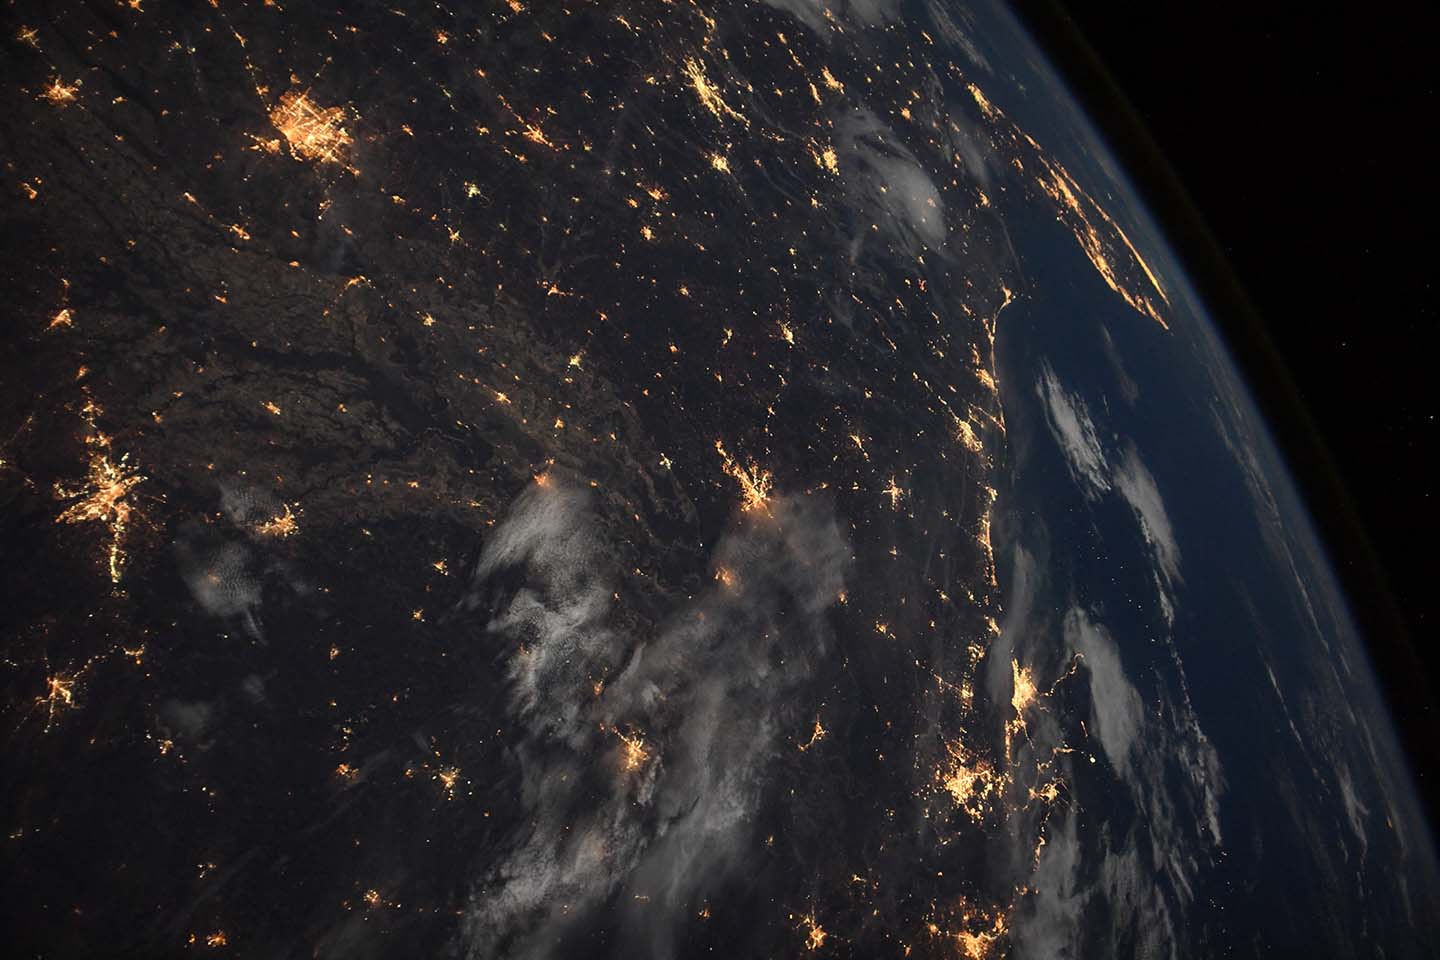 View of southern U.S. states and cities at night, taken from the International Space Station.